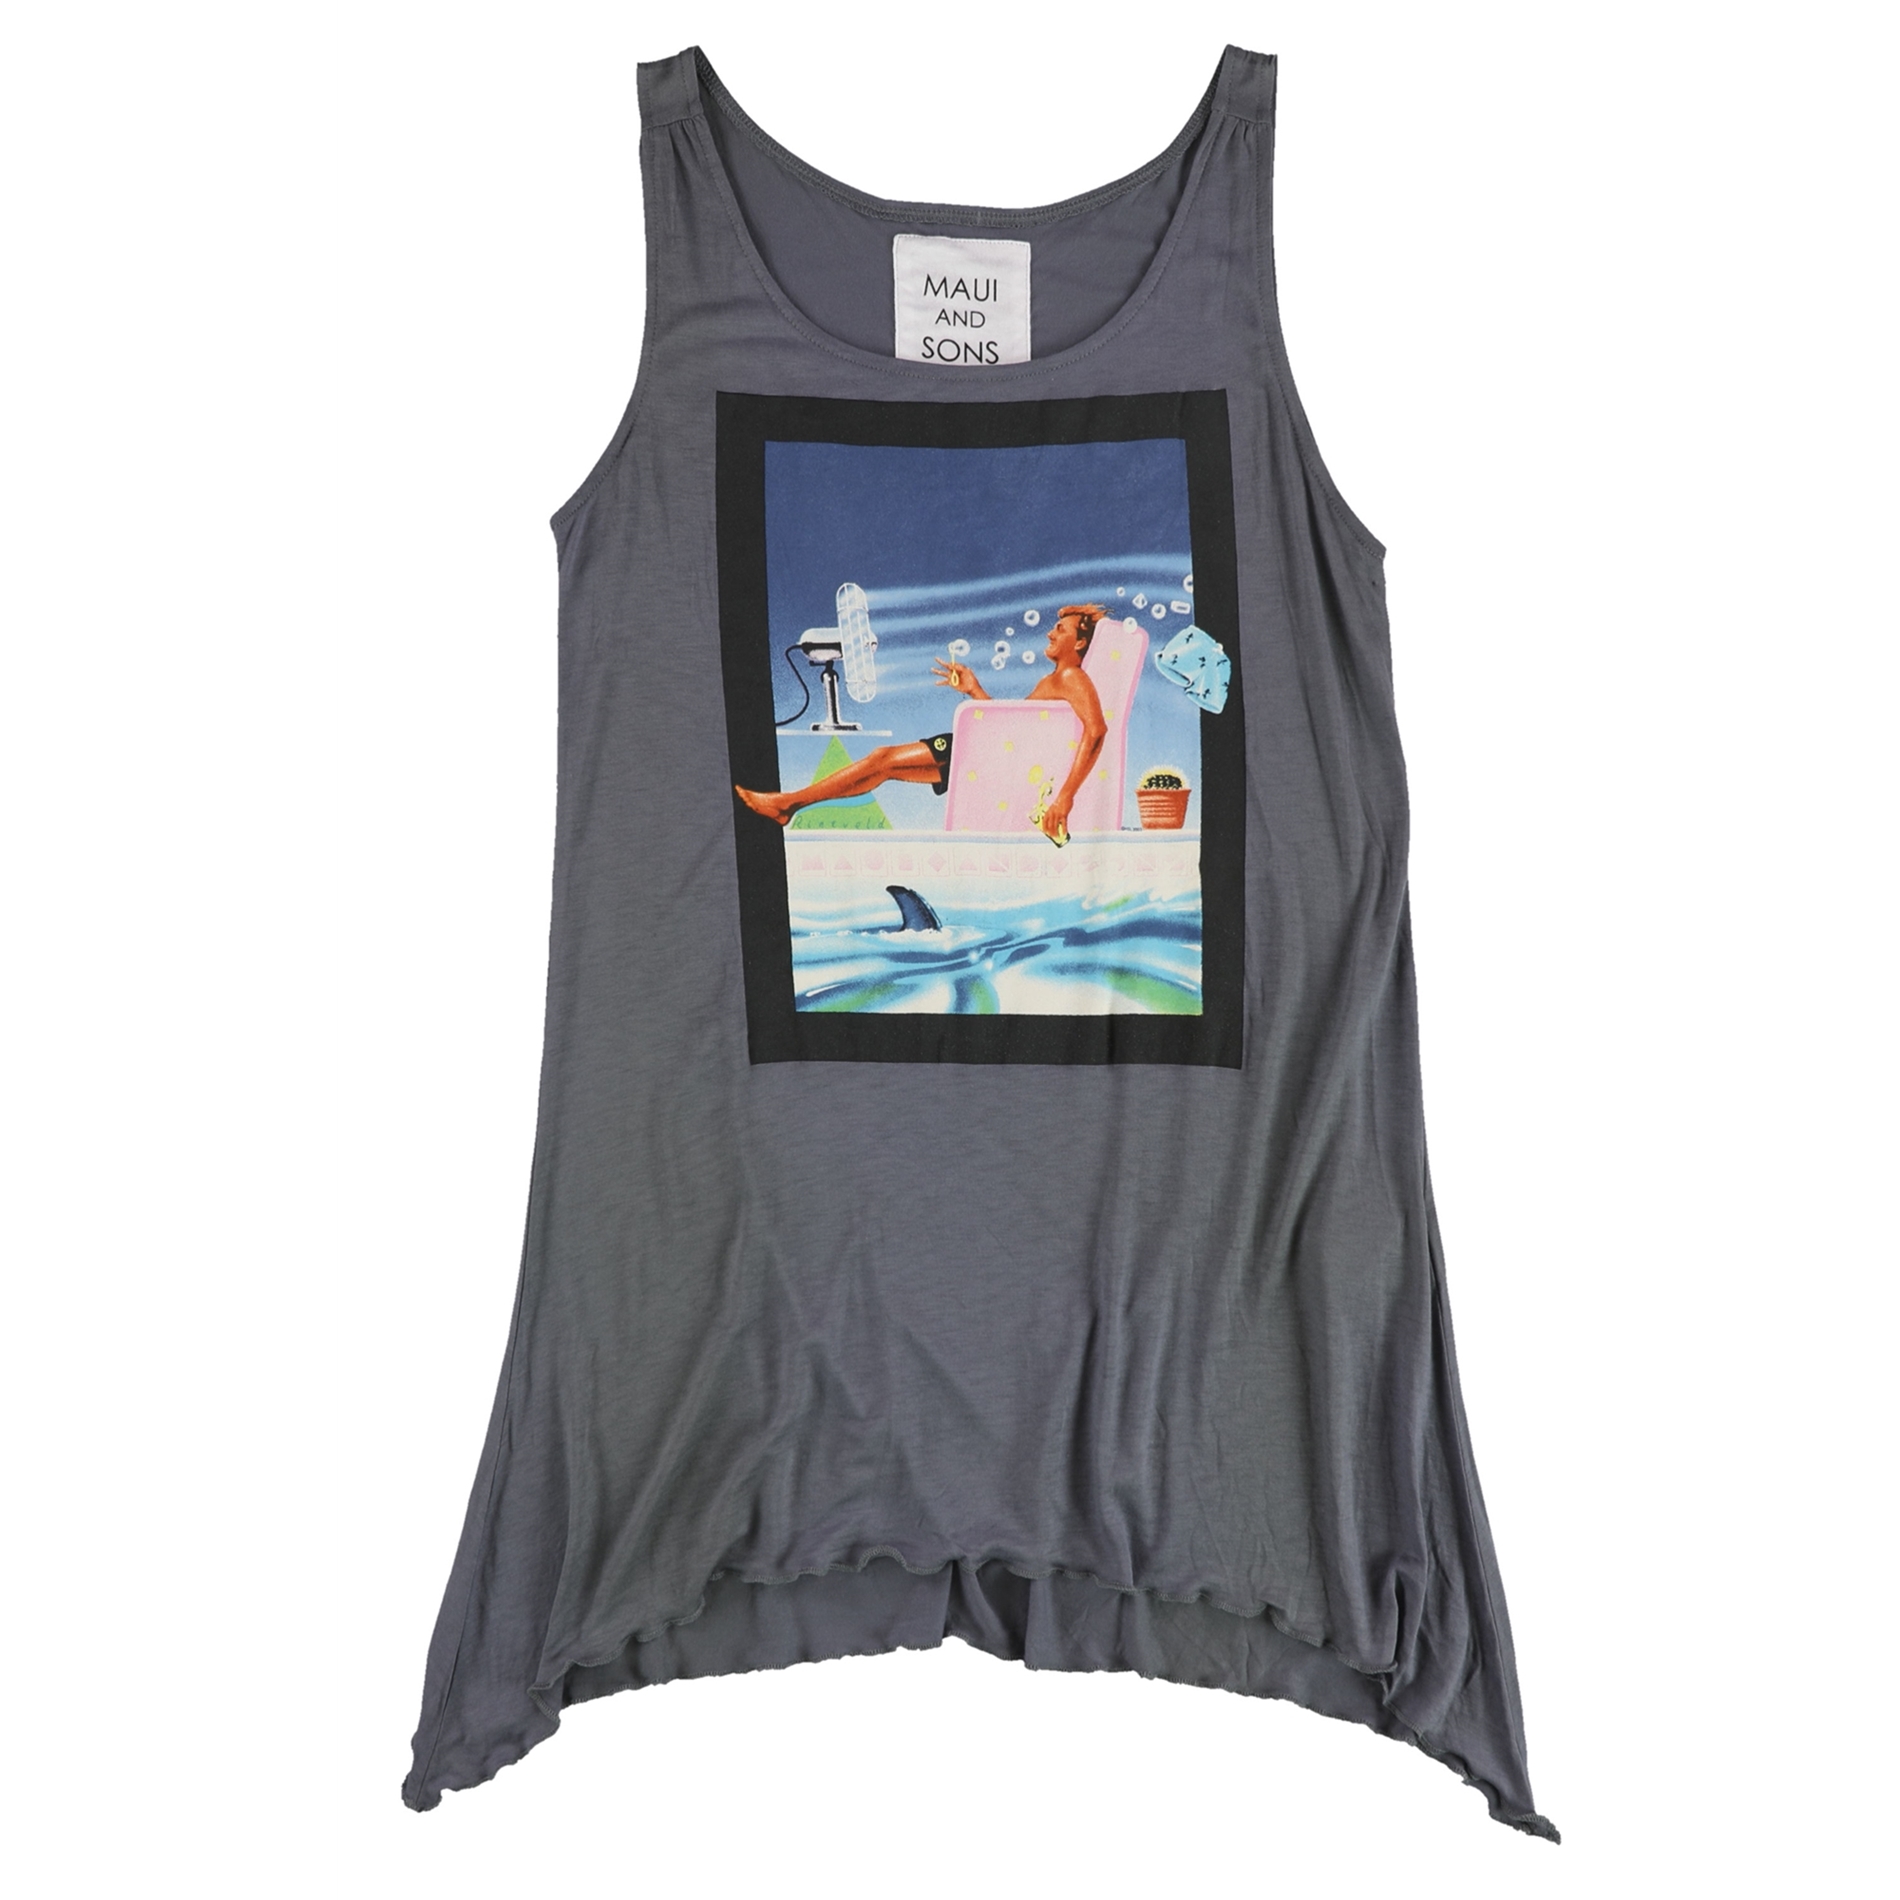 Maui and Sons Maui & Sons Womens Man And Fan Tank Top